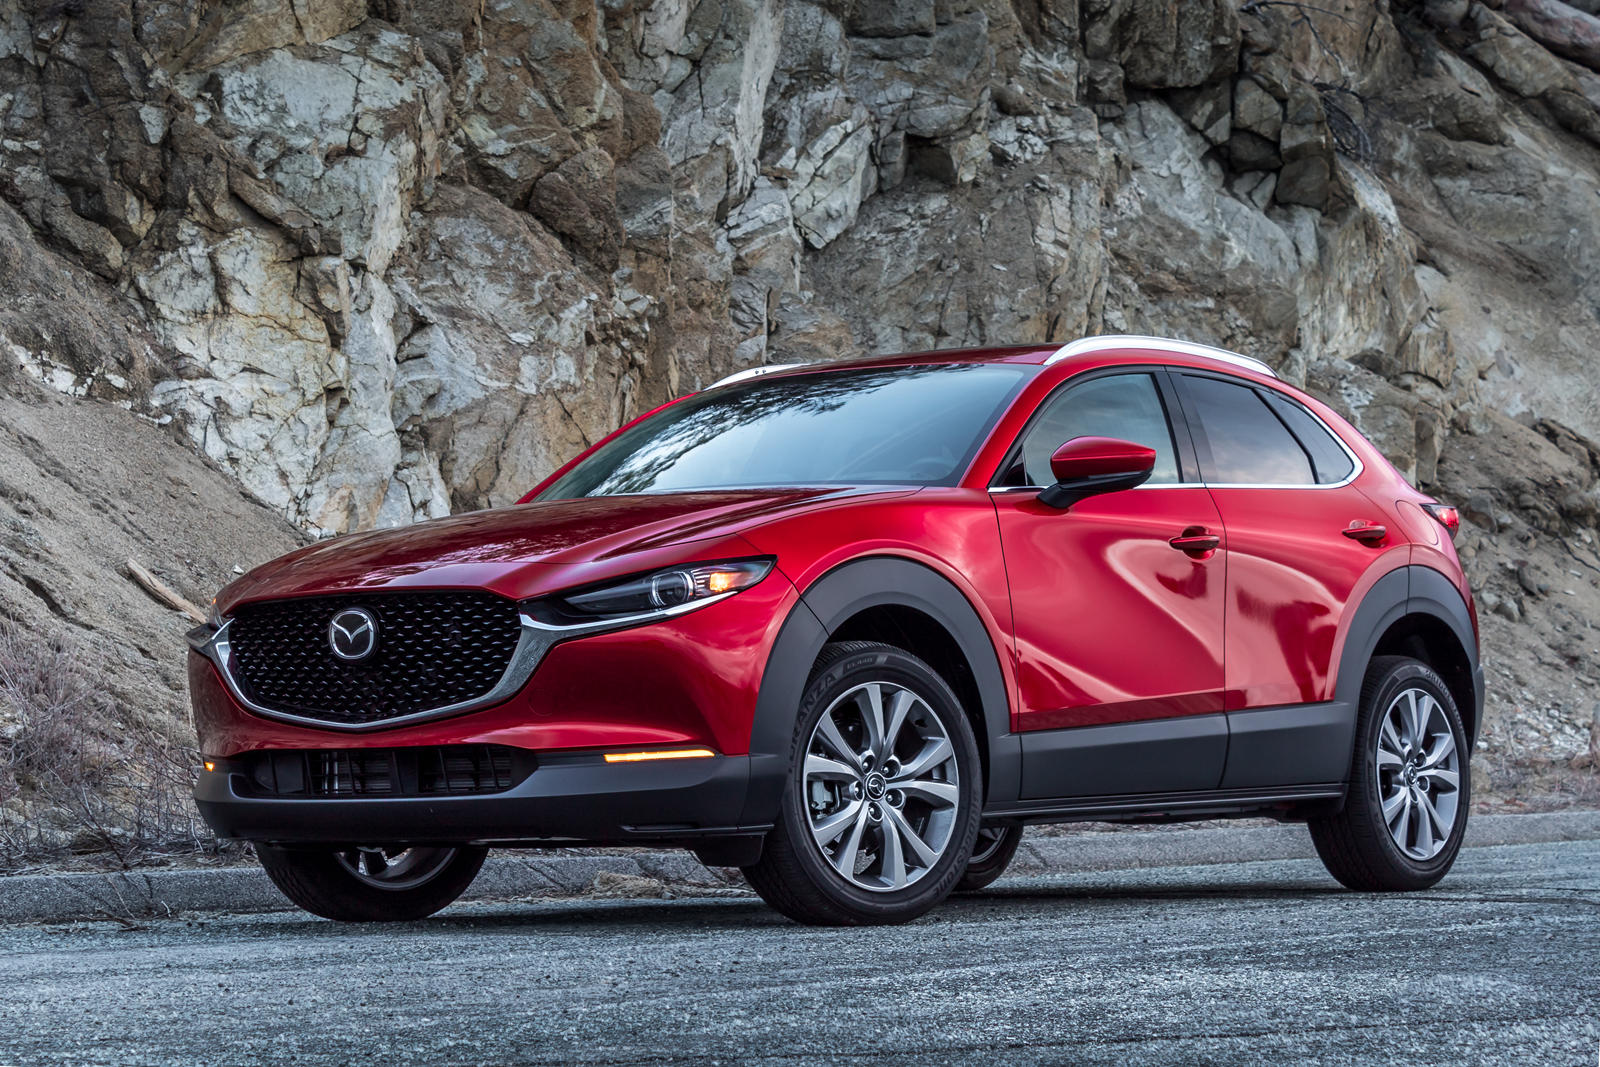 Ground Clearance Of Mazda Cx 30